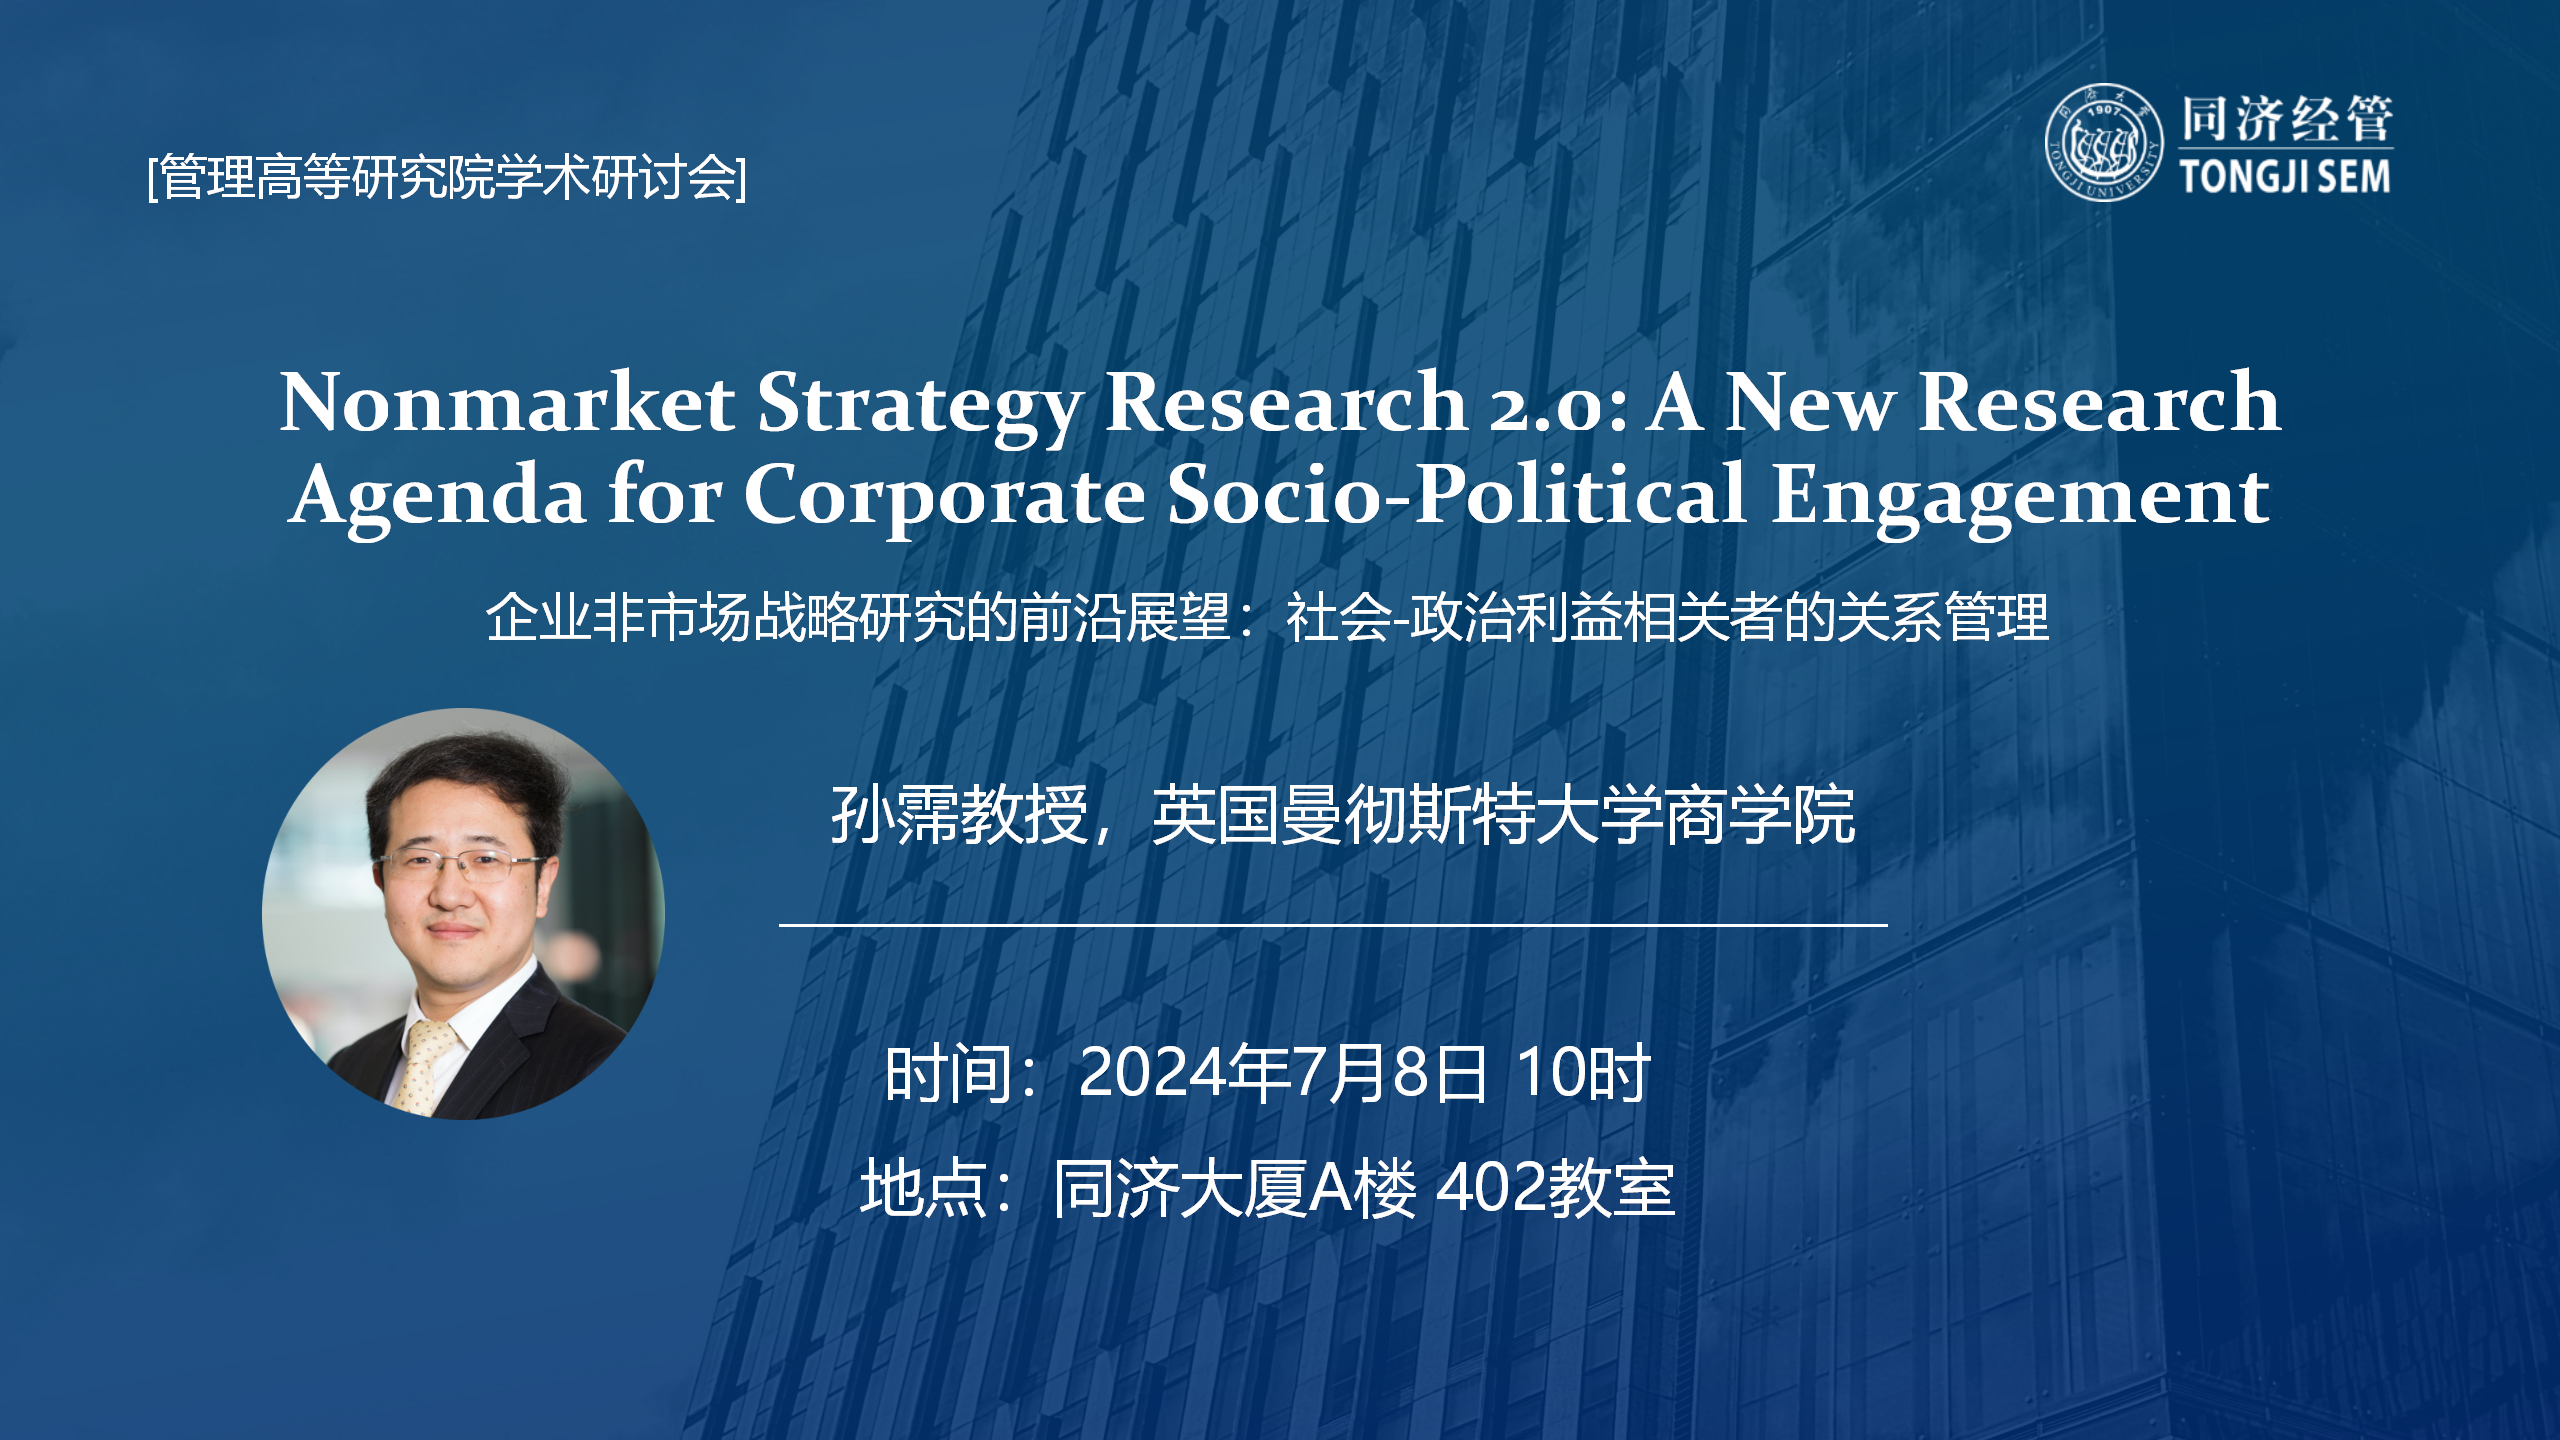 Nonmarket Strategy Research 2.0: A New Research Agenda for Corporate Socio-Political Engagement